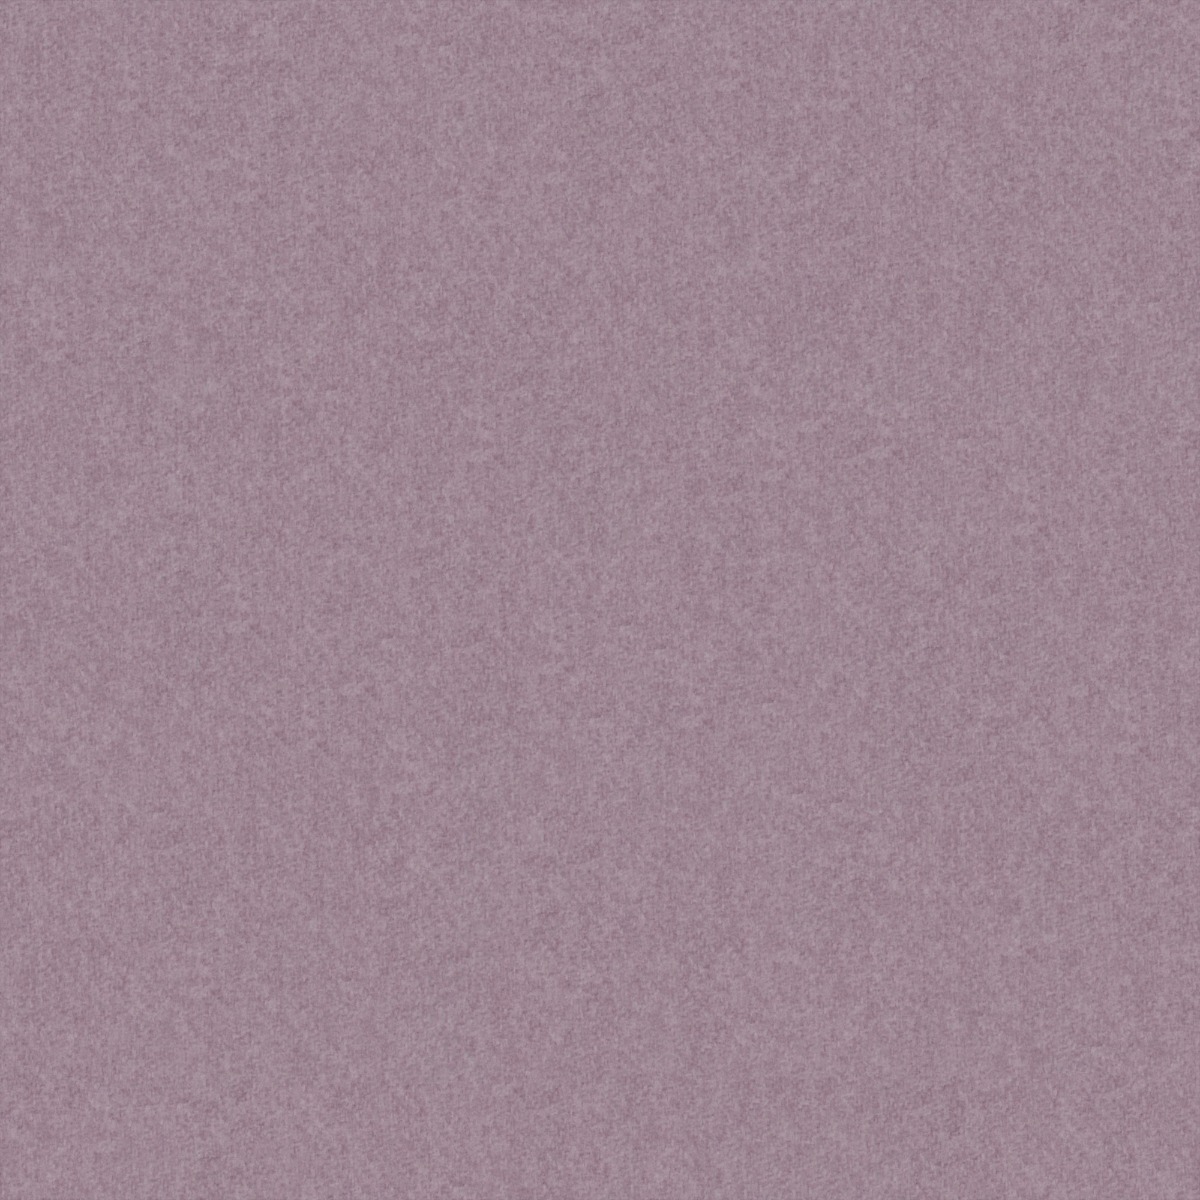 A seamless fabric texture with plain purple flat units arranged in a None pattern